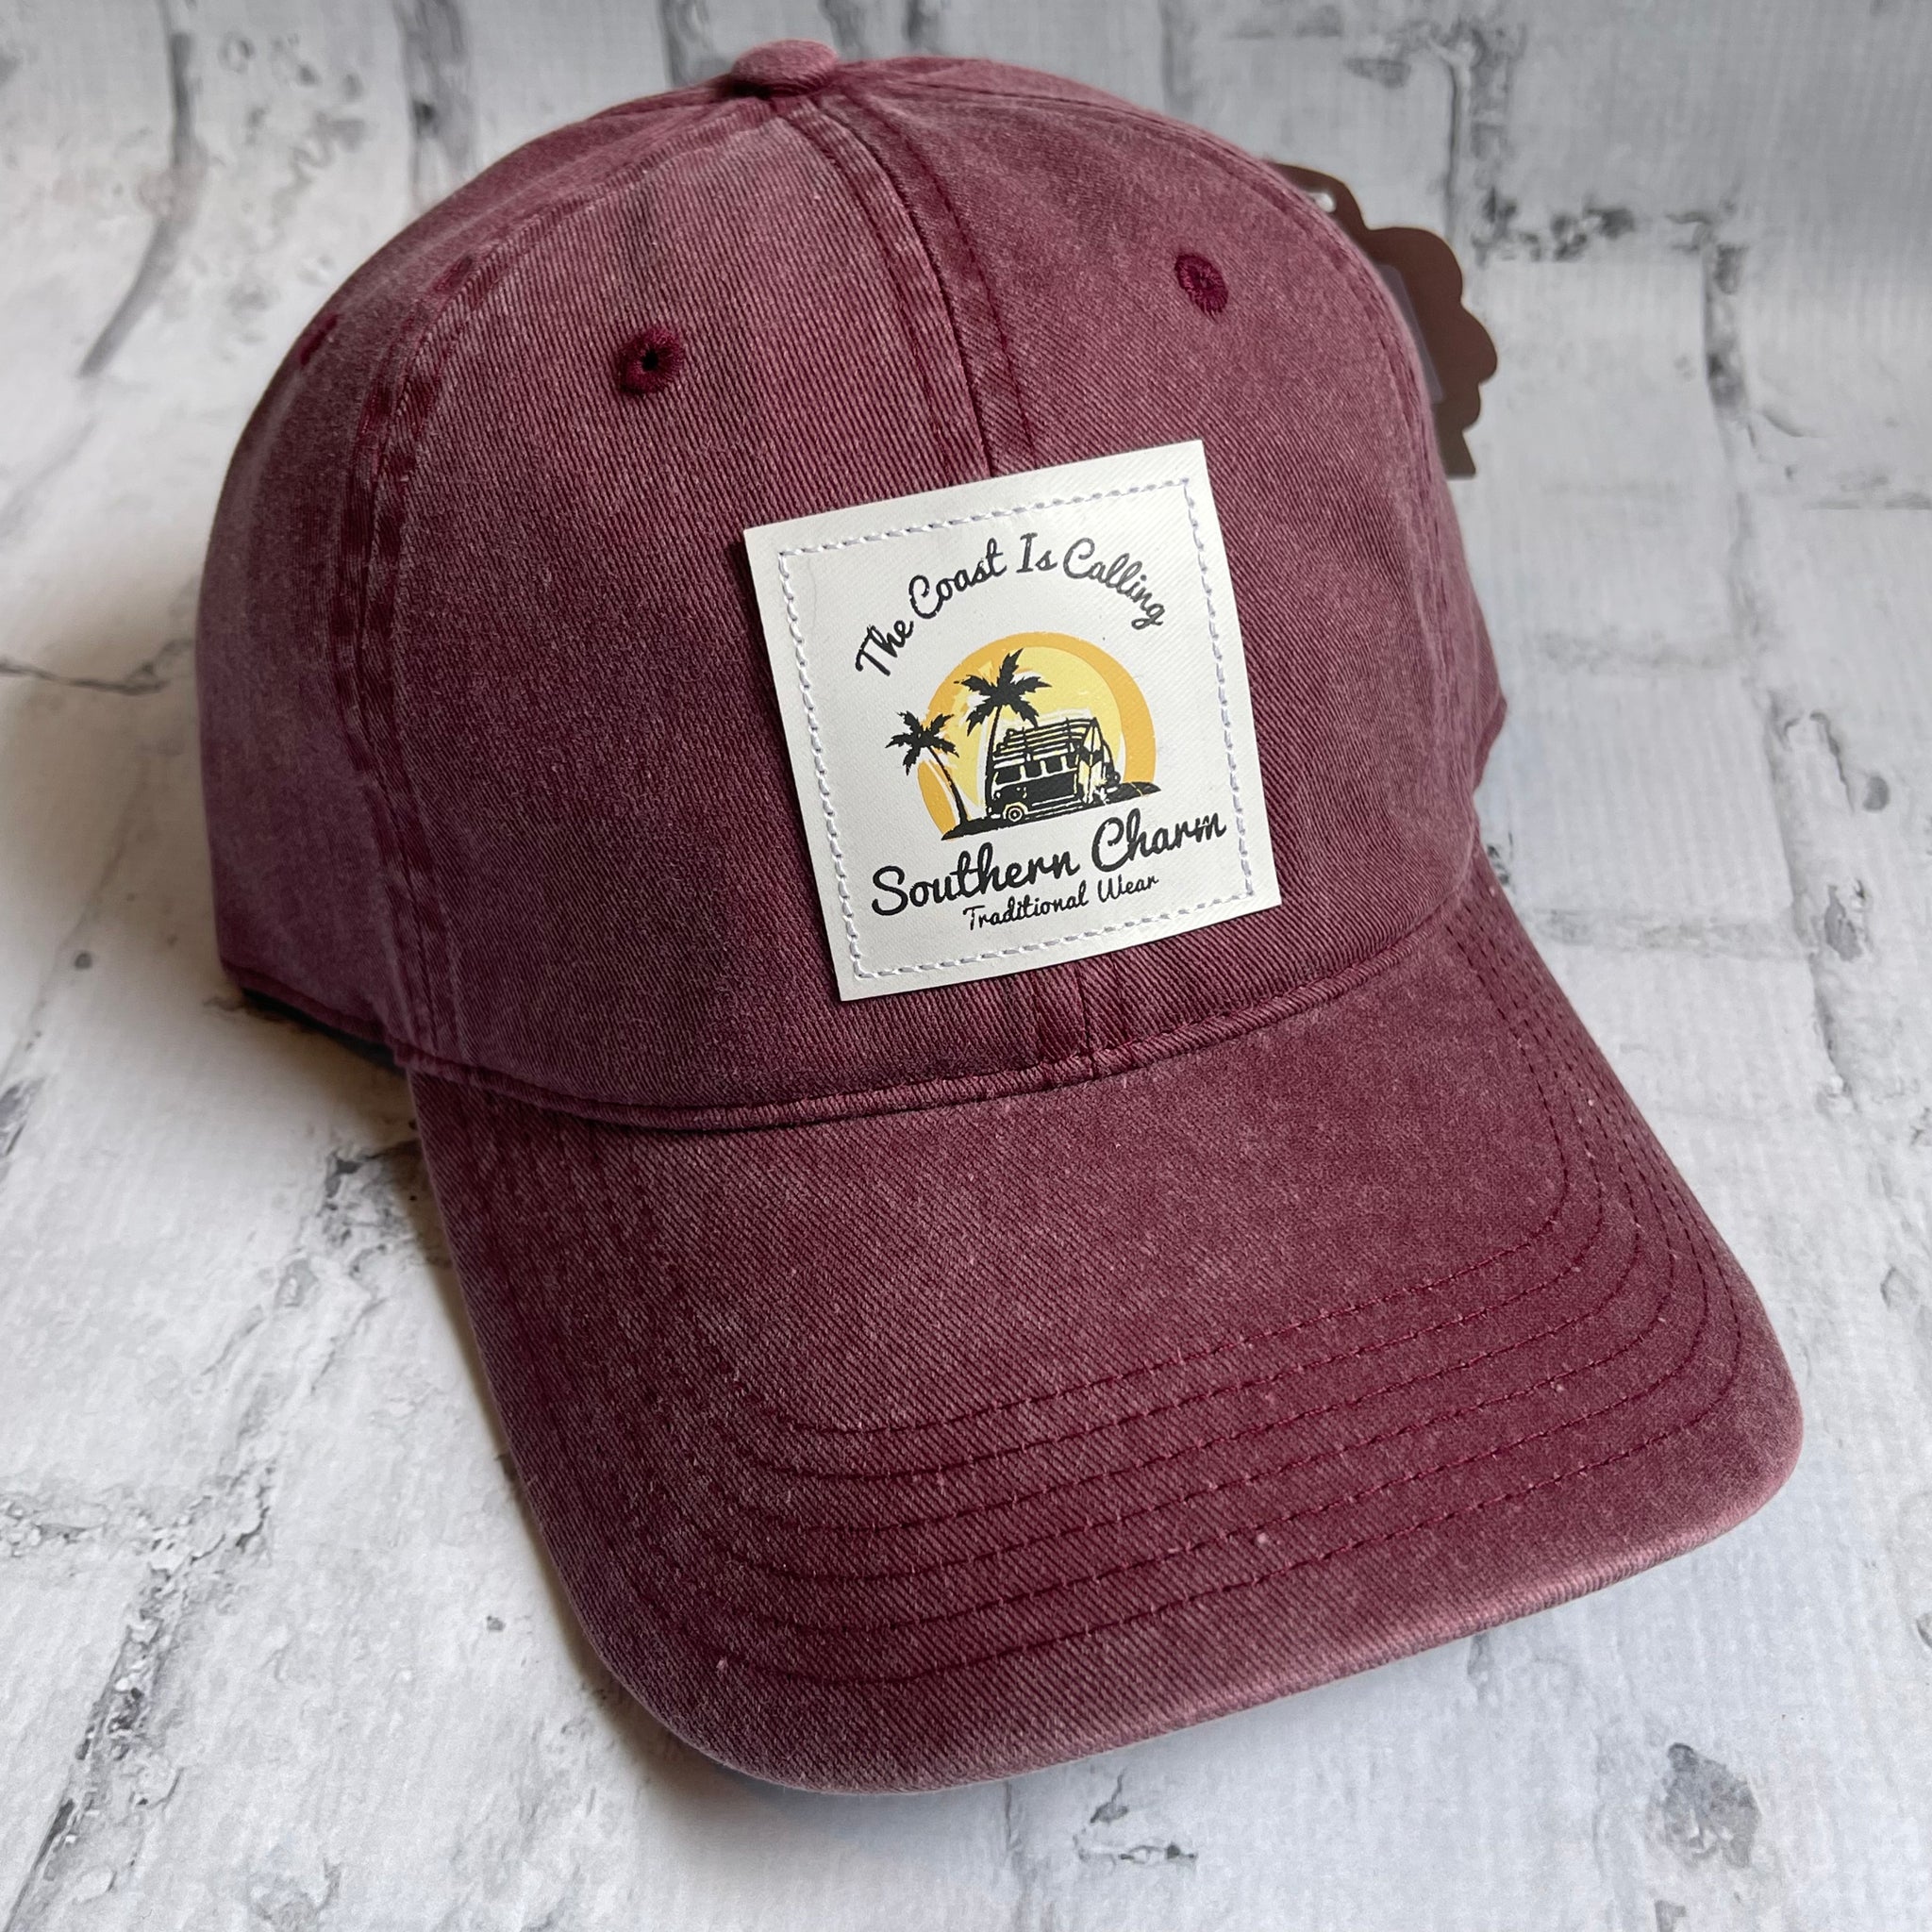 Southern Charm "Coast Is Calling" Hat - Dark Maroon with Leather Patch - Southern Charm "Shop The Charm"